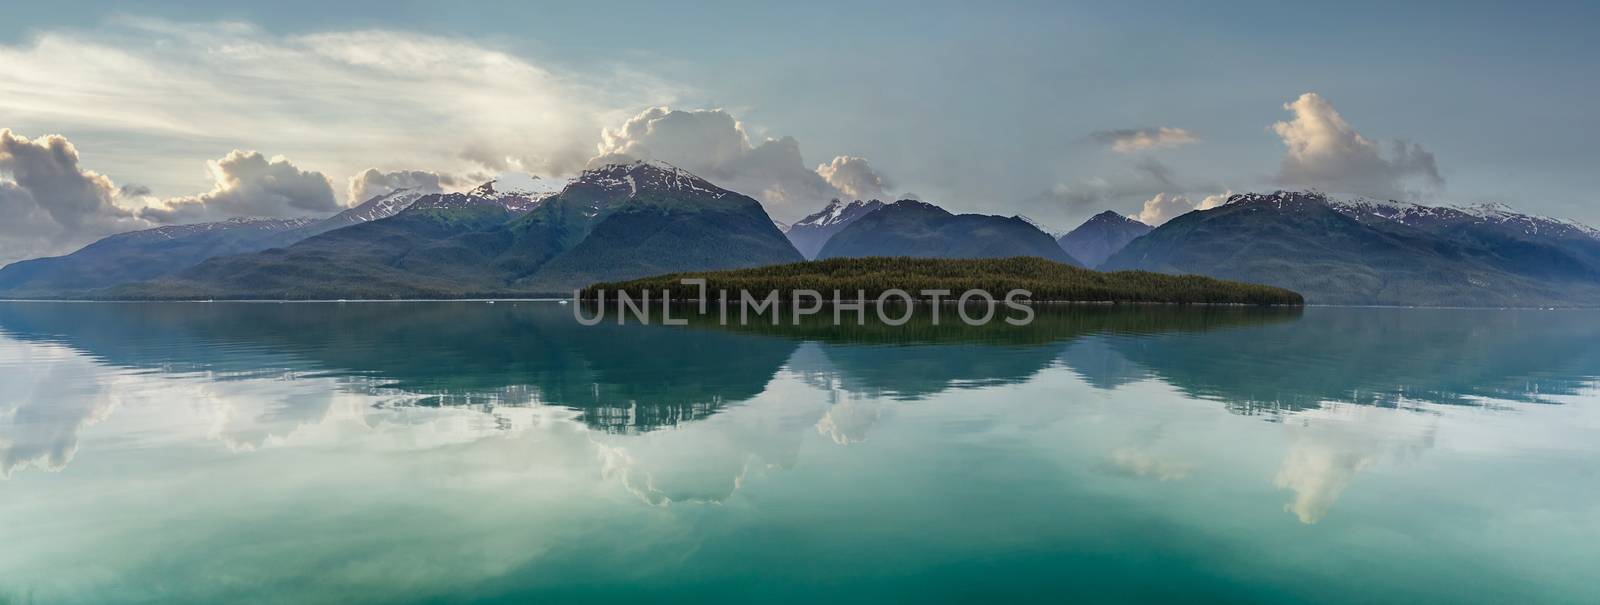 Beautiful landscape of snow capped mountains and a lone island full of green trees in a fjord in Alaska, USA. Cloudy sunset sky as a background. Mountains and sky reflecting in the water.